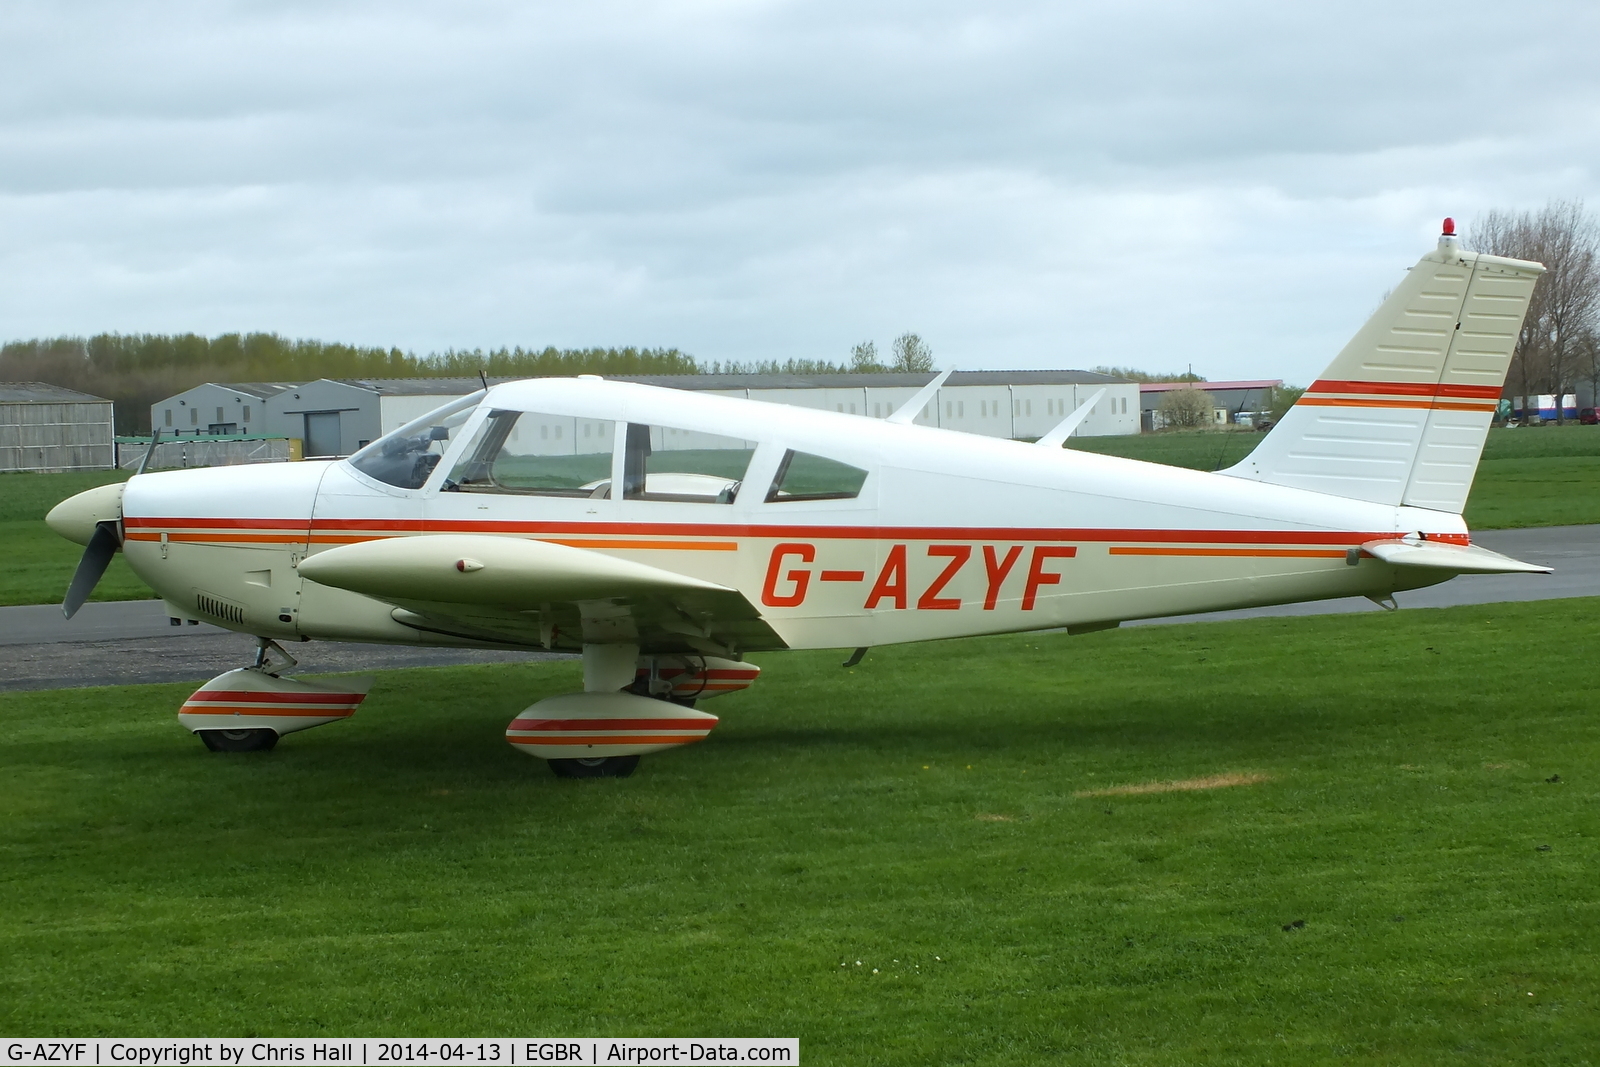 G-AZYF, 1968 Piper PA-28-180 Cherokee C/N 28-5227, at Breighton's 'Early Bird' Fly-in 13/04/14